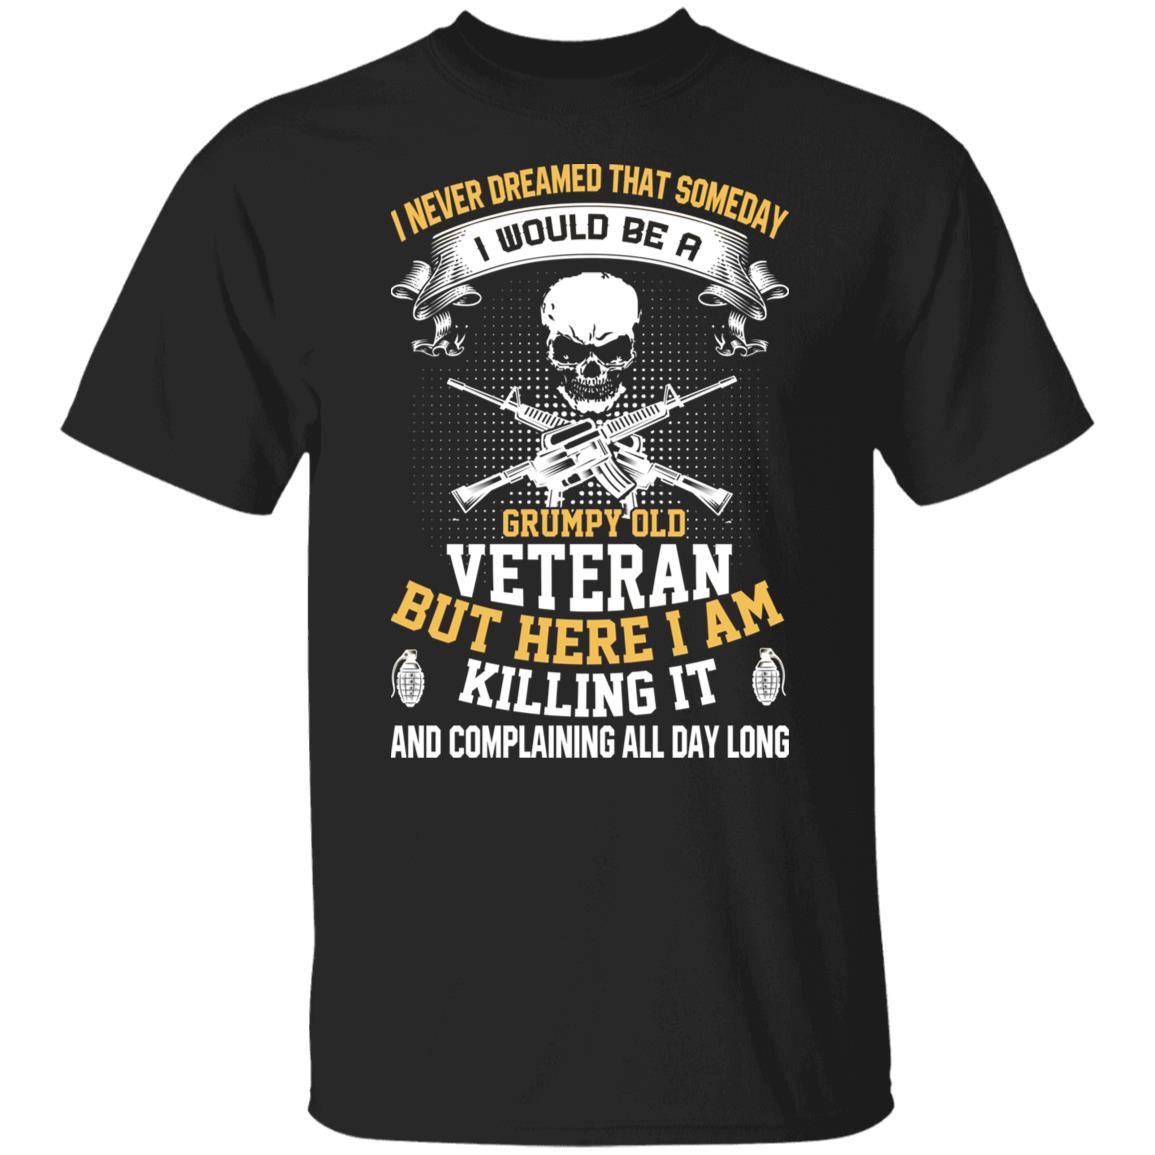 Military T-Shirt "I Would be A Grumpy Old Veteran" T-Shirt On Front-T-Shirts-Veterans Nation